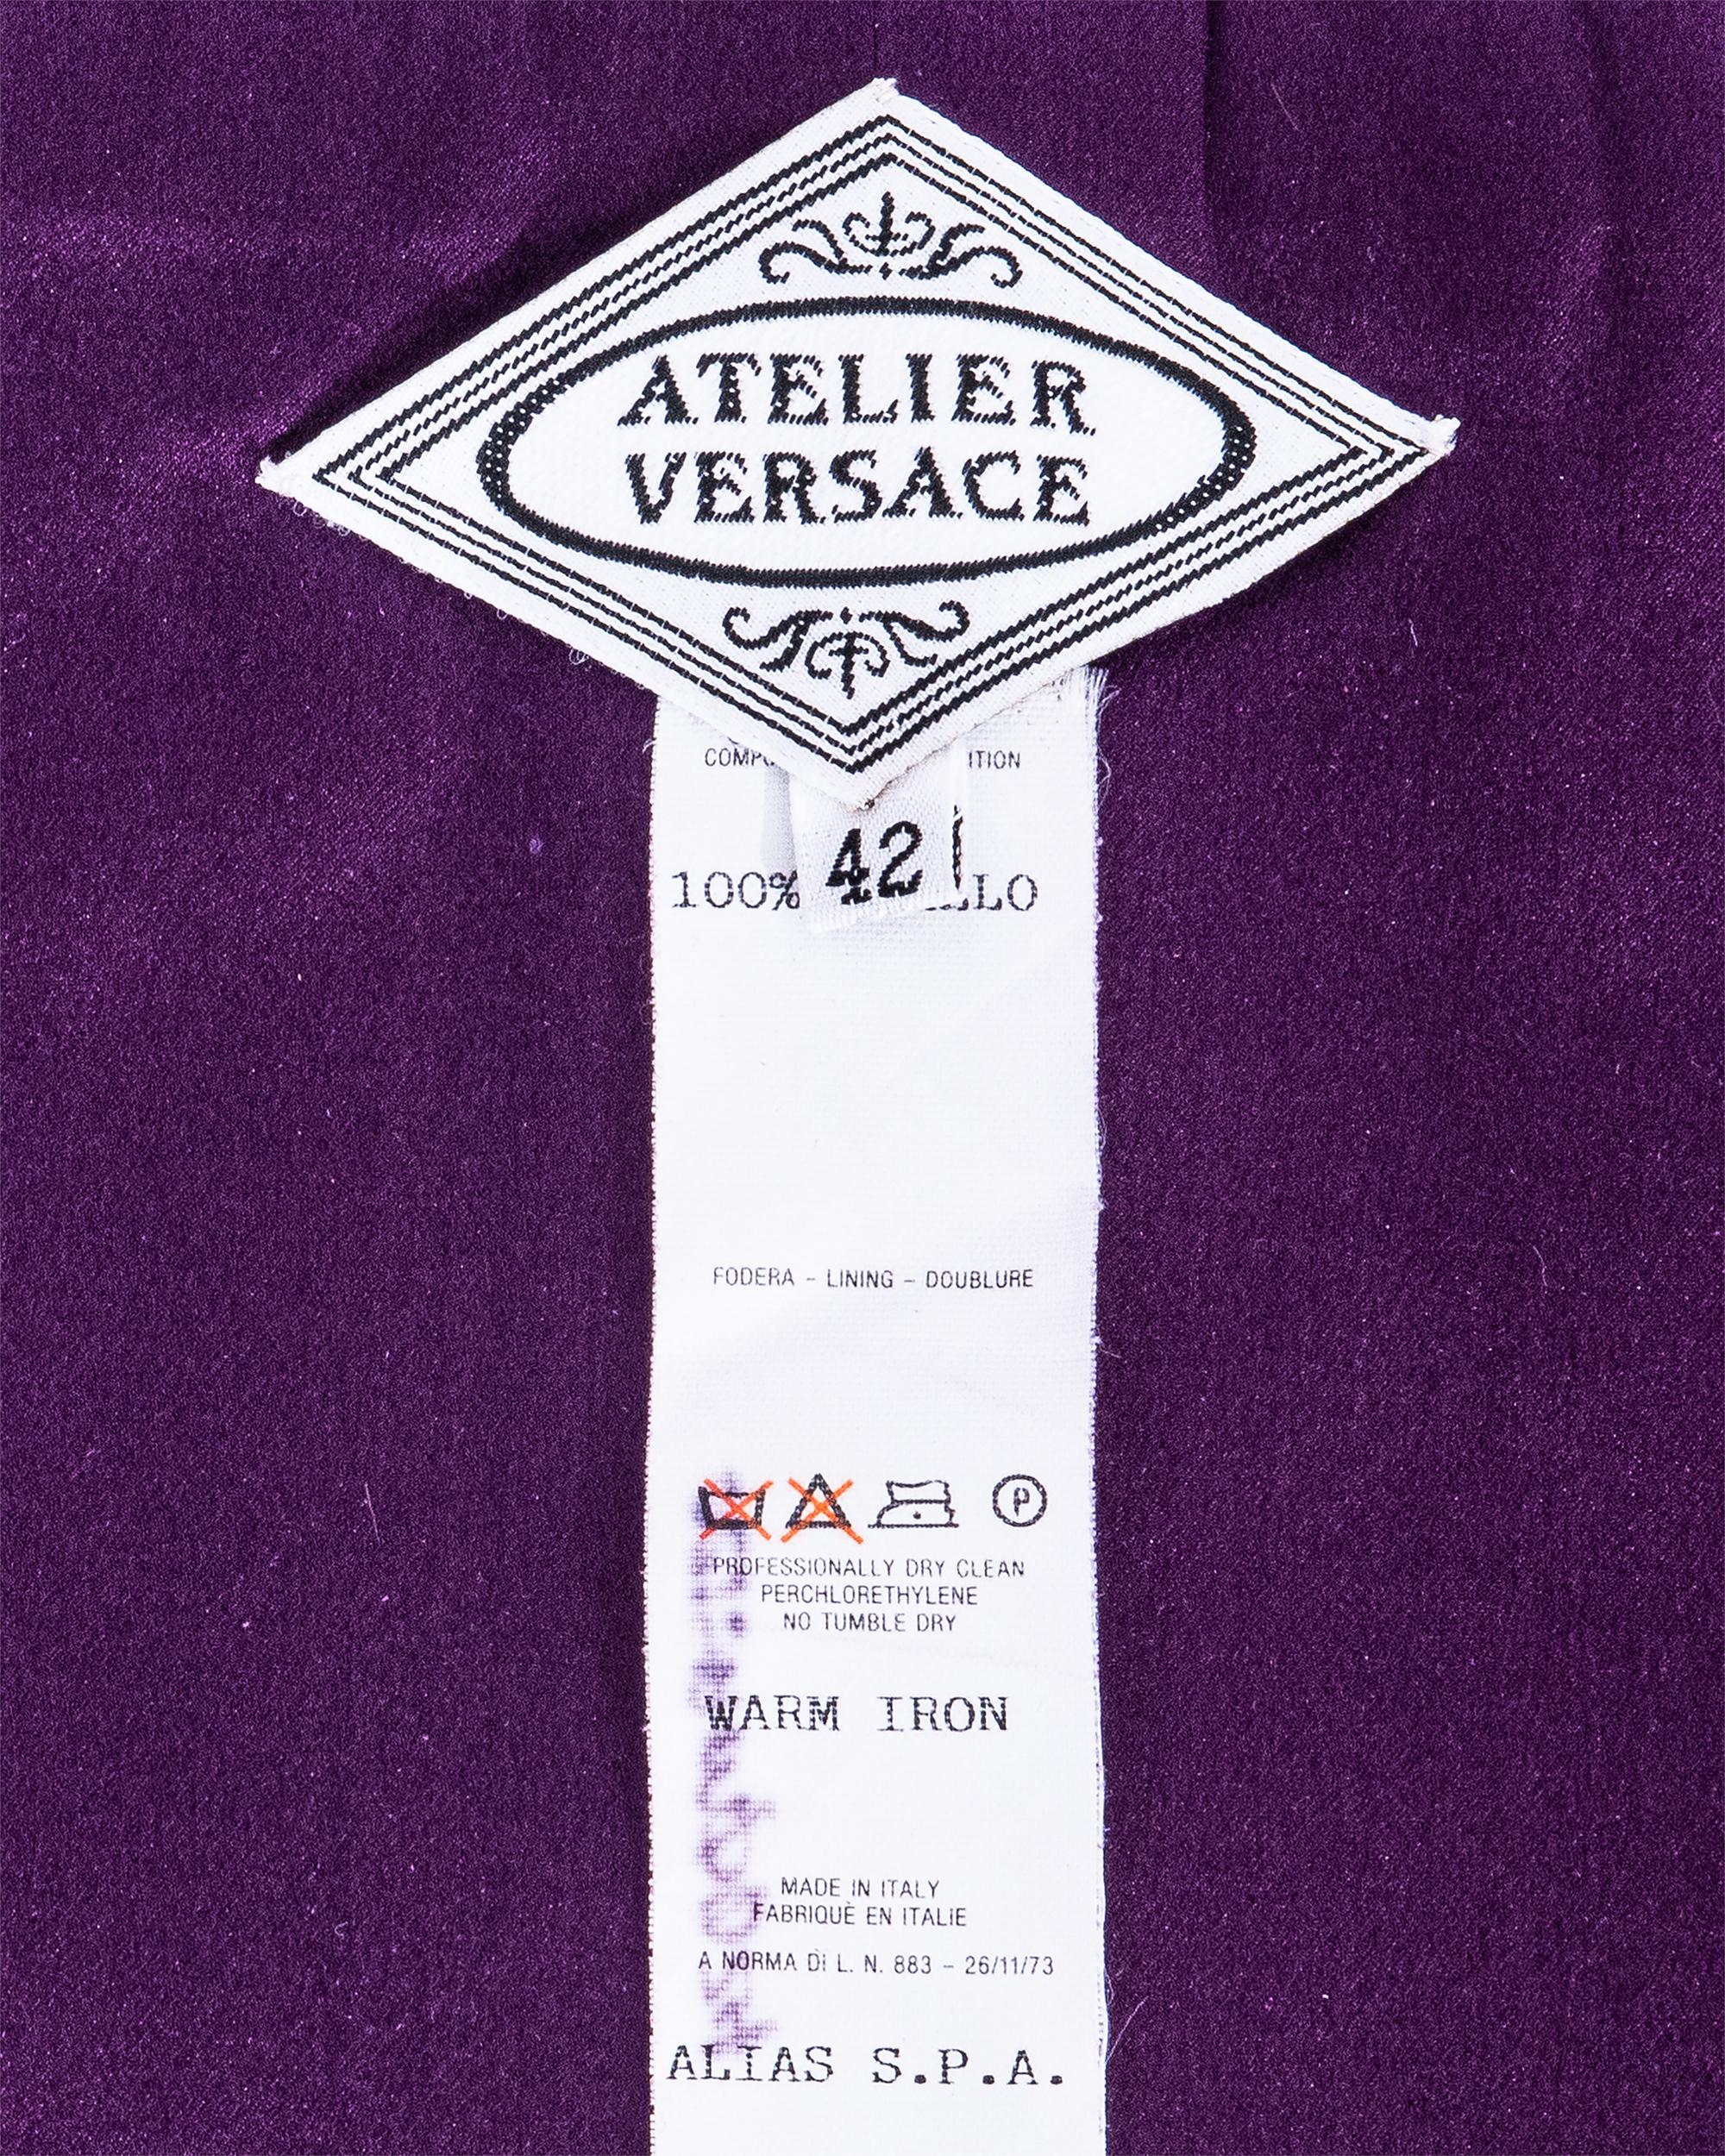 S/S 1998 Atelier Versace Haute Couture Purple Strapless Oroton Chainmail Top For Sale 5